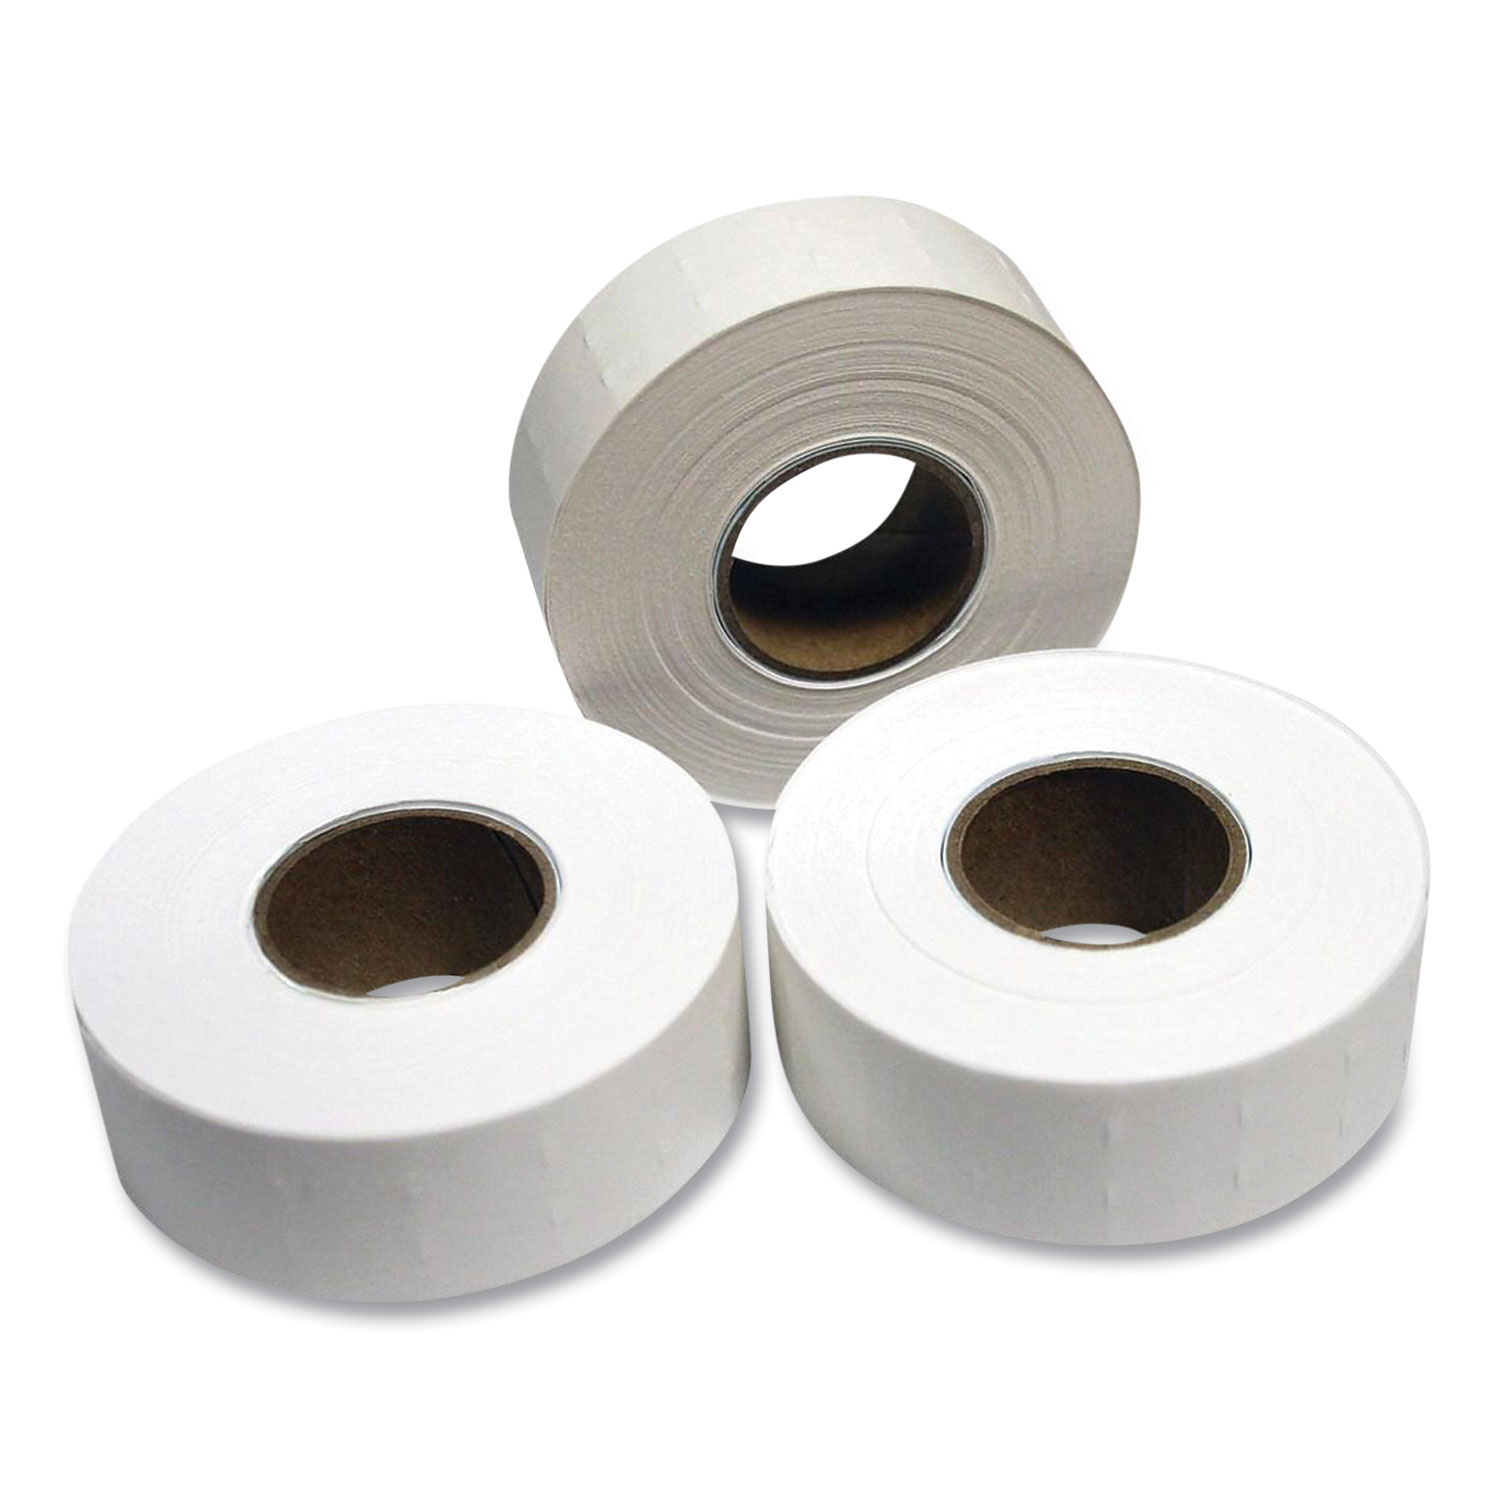 Monarch® One-Line Labels for Garvey 22-8, 0.81 x 0.44, White, 1,200/Roll, 3 Rolls/Pack